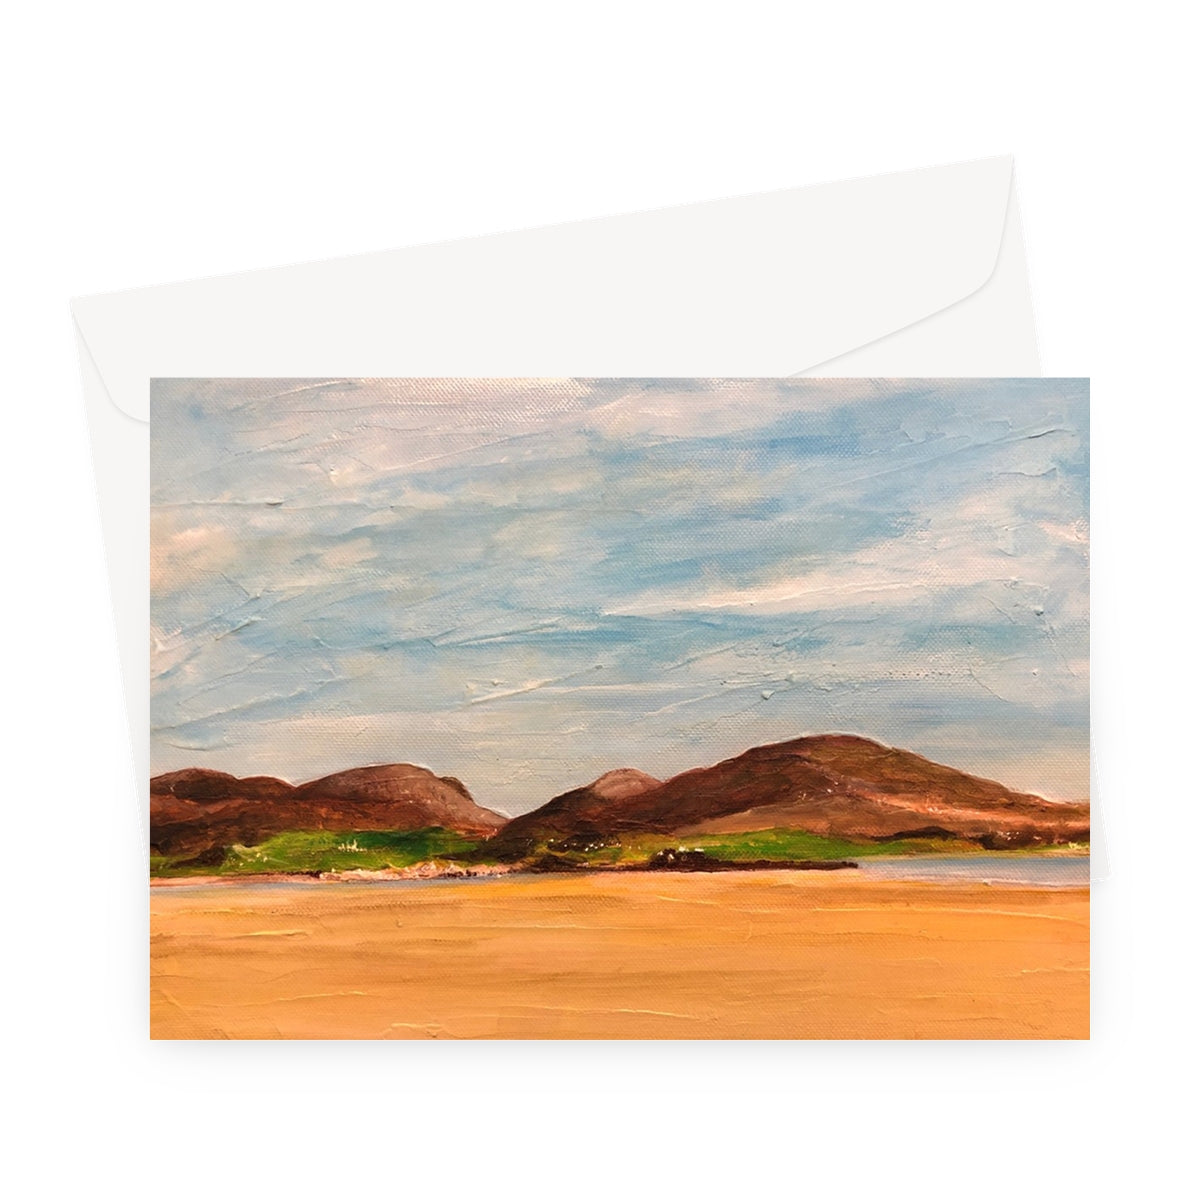 Uig Sands Lewis Art Gifts Greeting Card-Greetings Cards-Hebridean Islands Art Gallery-A5 Landscape-10 Cards-Paintings, Prints, Homeware, Art Gifts From Scotland By Scottish Artist Kevin Hunter